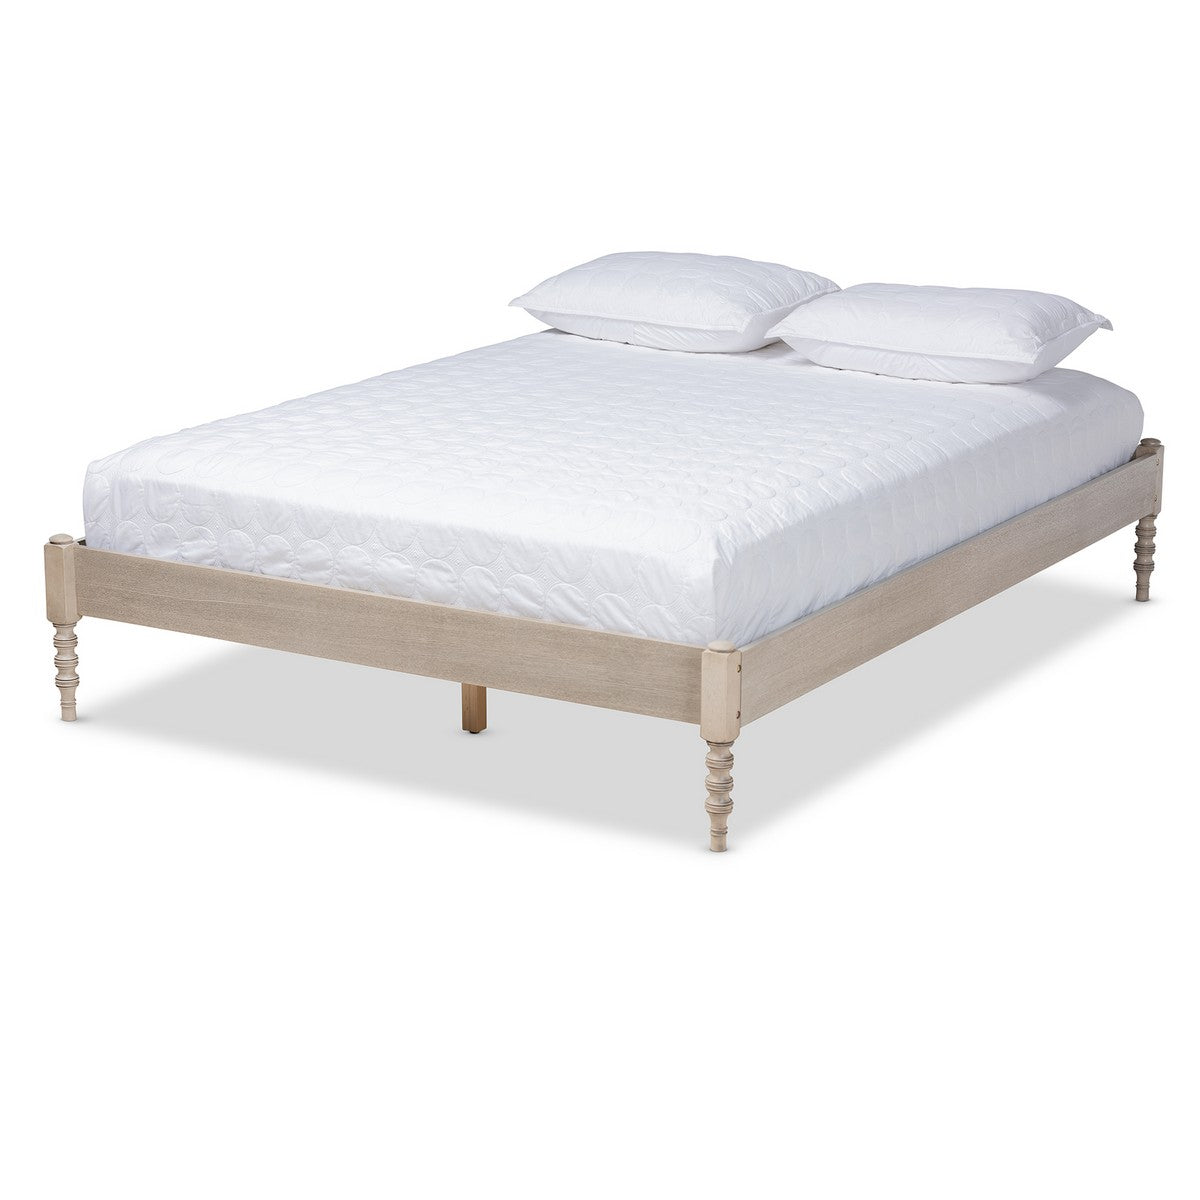 Baxton Studio Cielle French Bohemian Antique White Oak Finished Wood Queen Size Platform Bed Frame Baxton Studio-Bed Frames-Minimal And Modern - 1